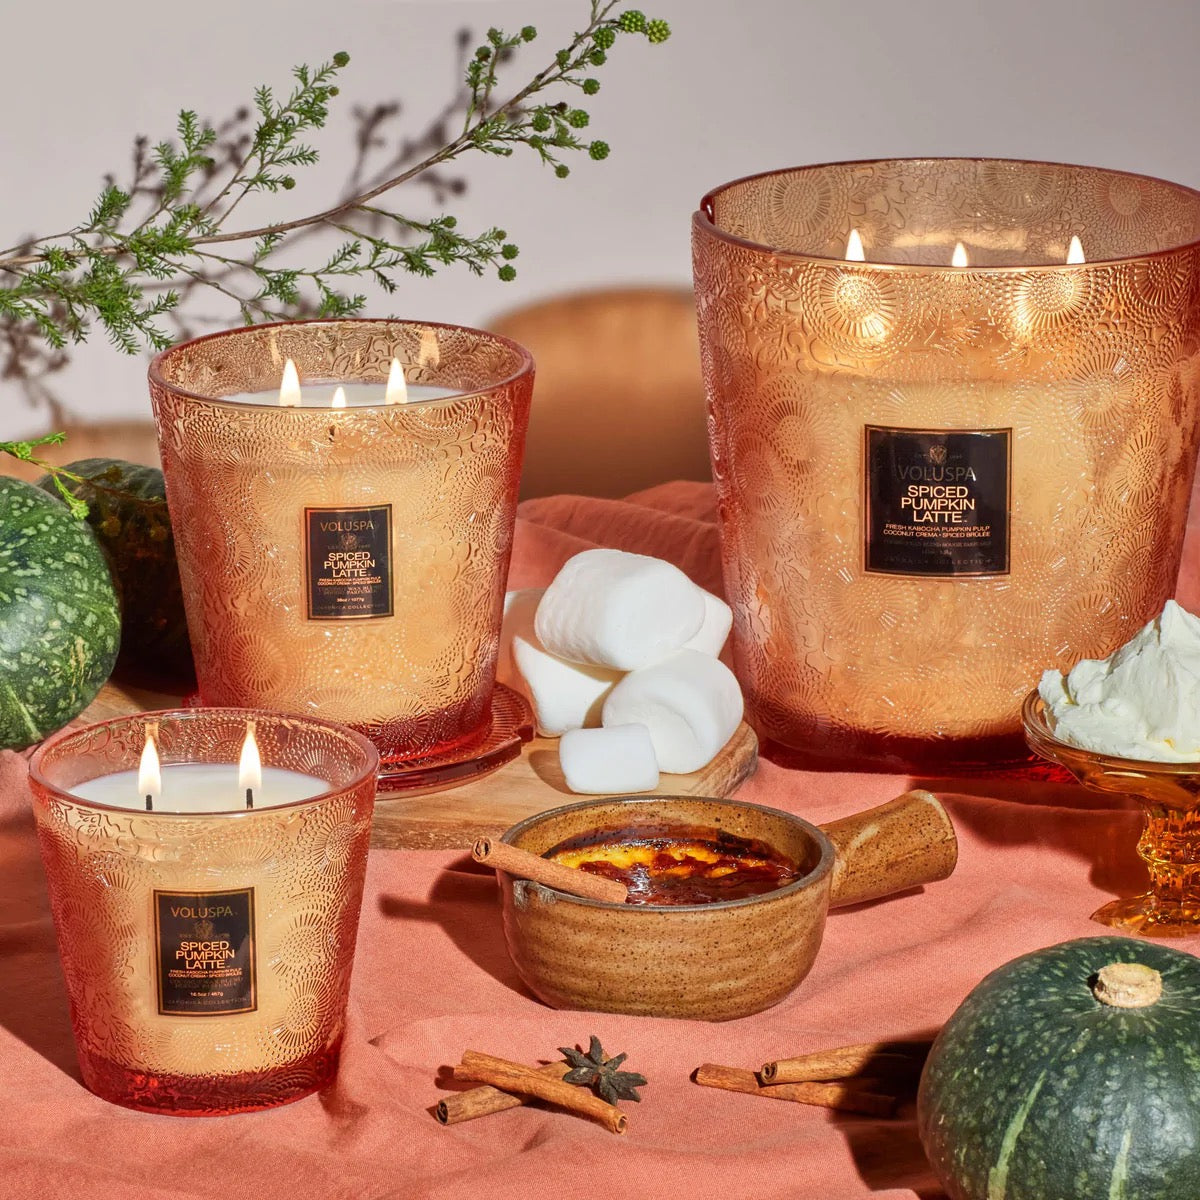 Boxed 3-Wick Hearth Candle W.Lid - Spiced Pumpkin Latte